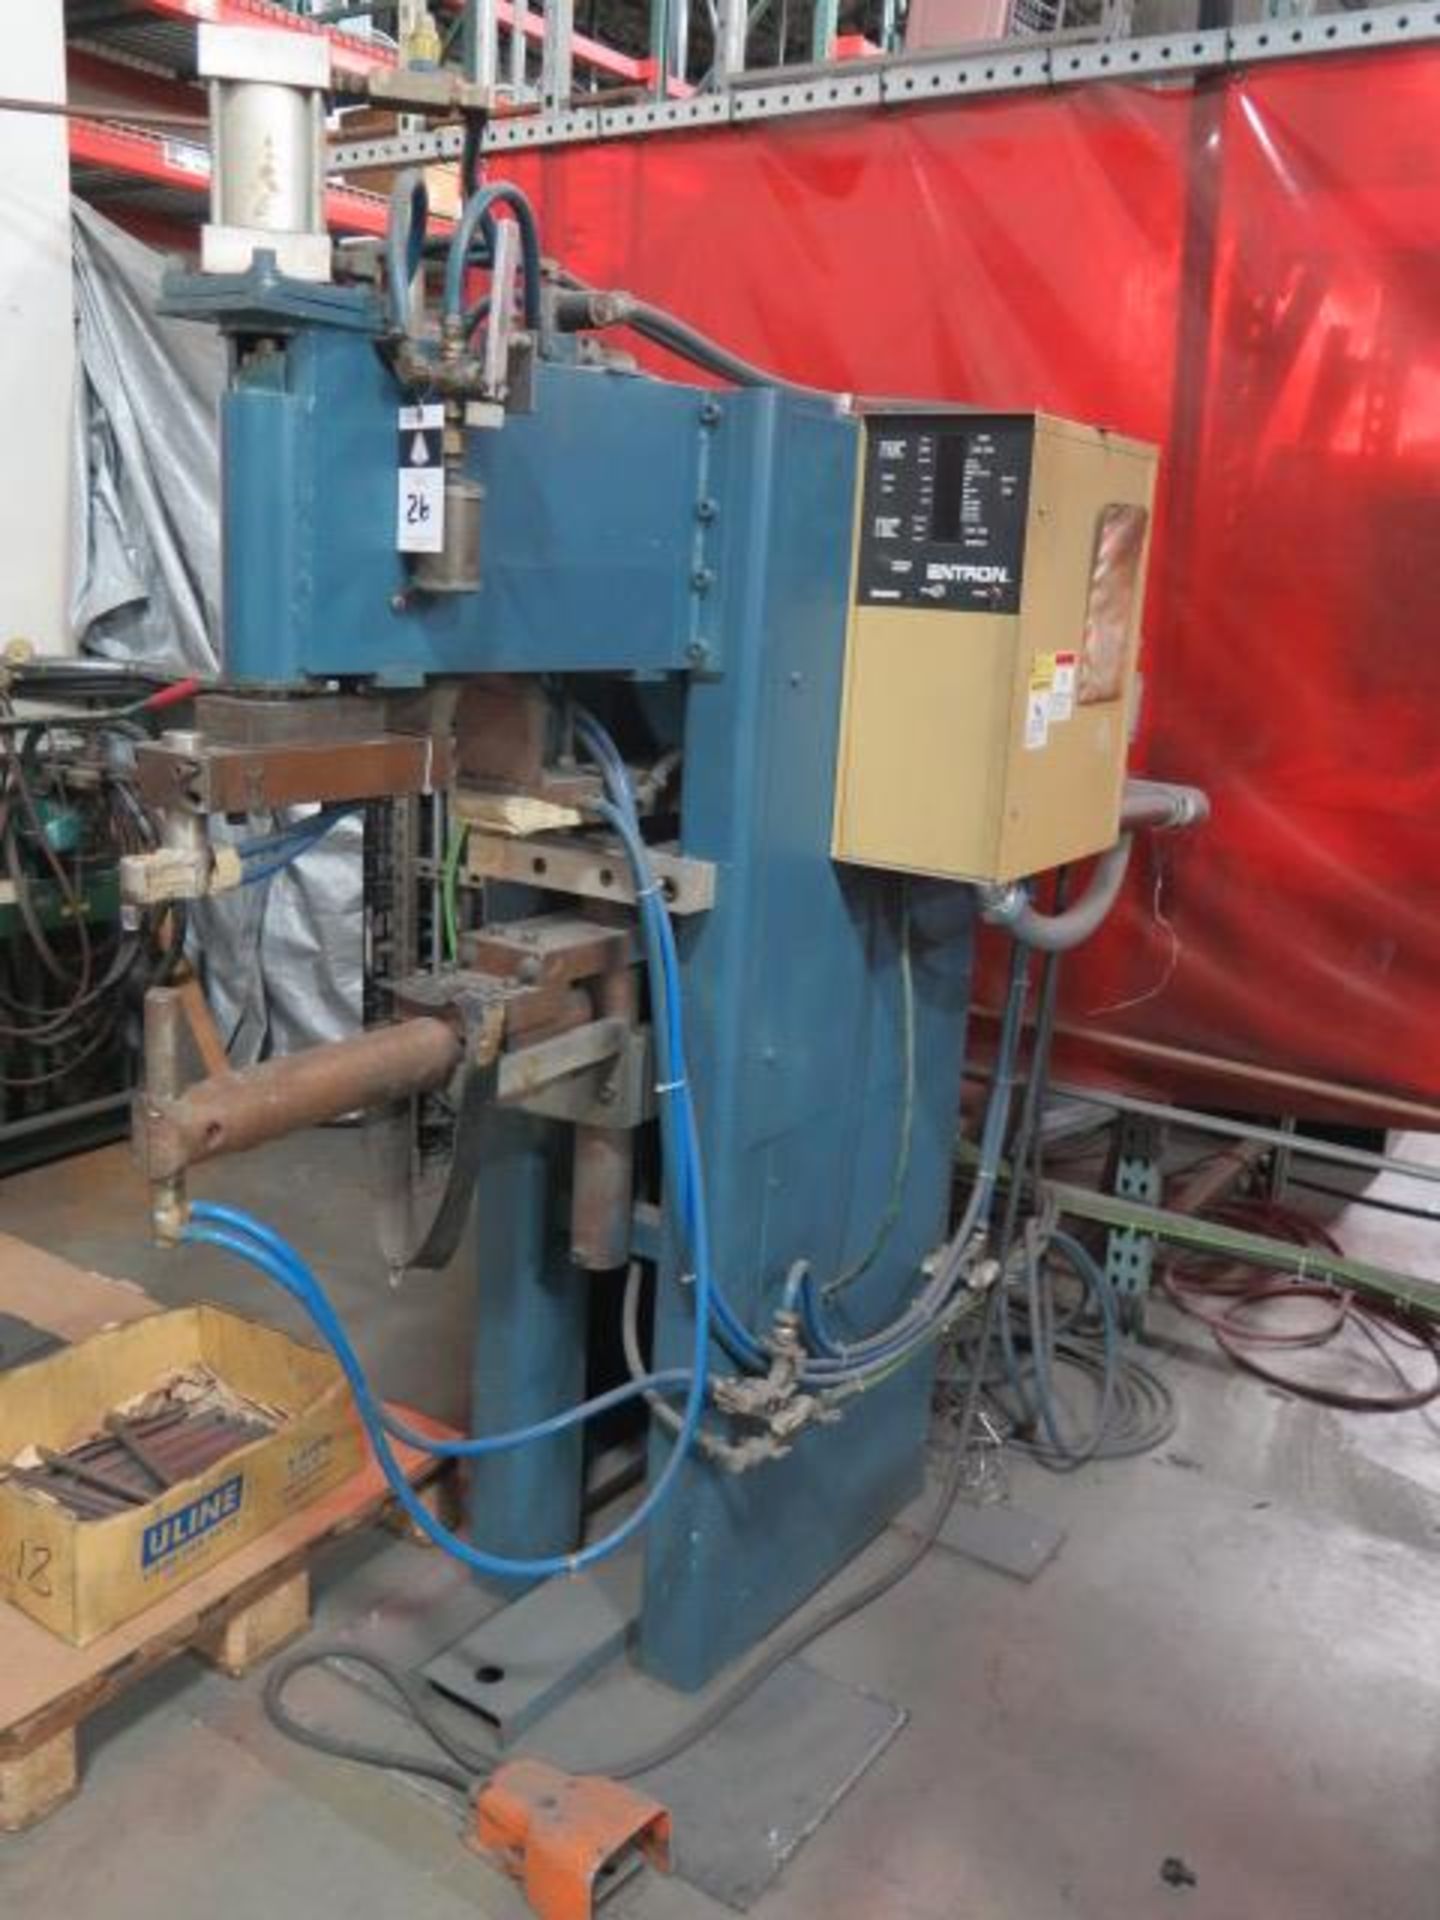 Entron Pneumatic Actuated Spot Welder s/n 10599 w/ Entron Controls (SOLD AS-IS - NO WARRANTY)